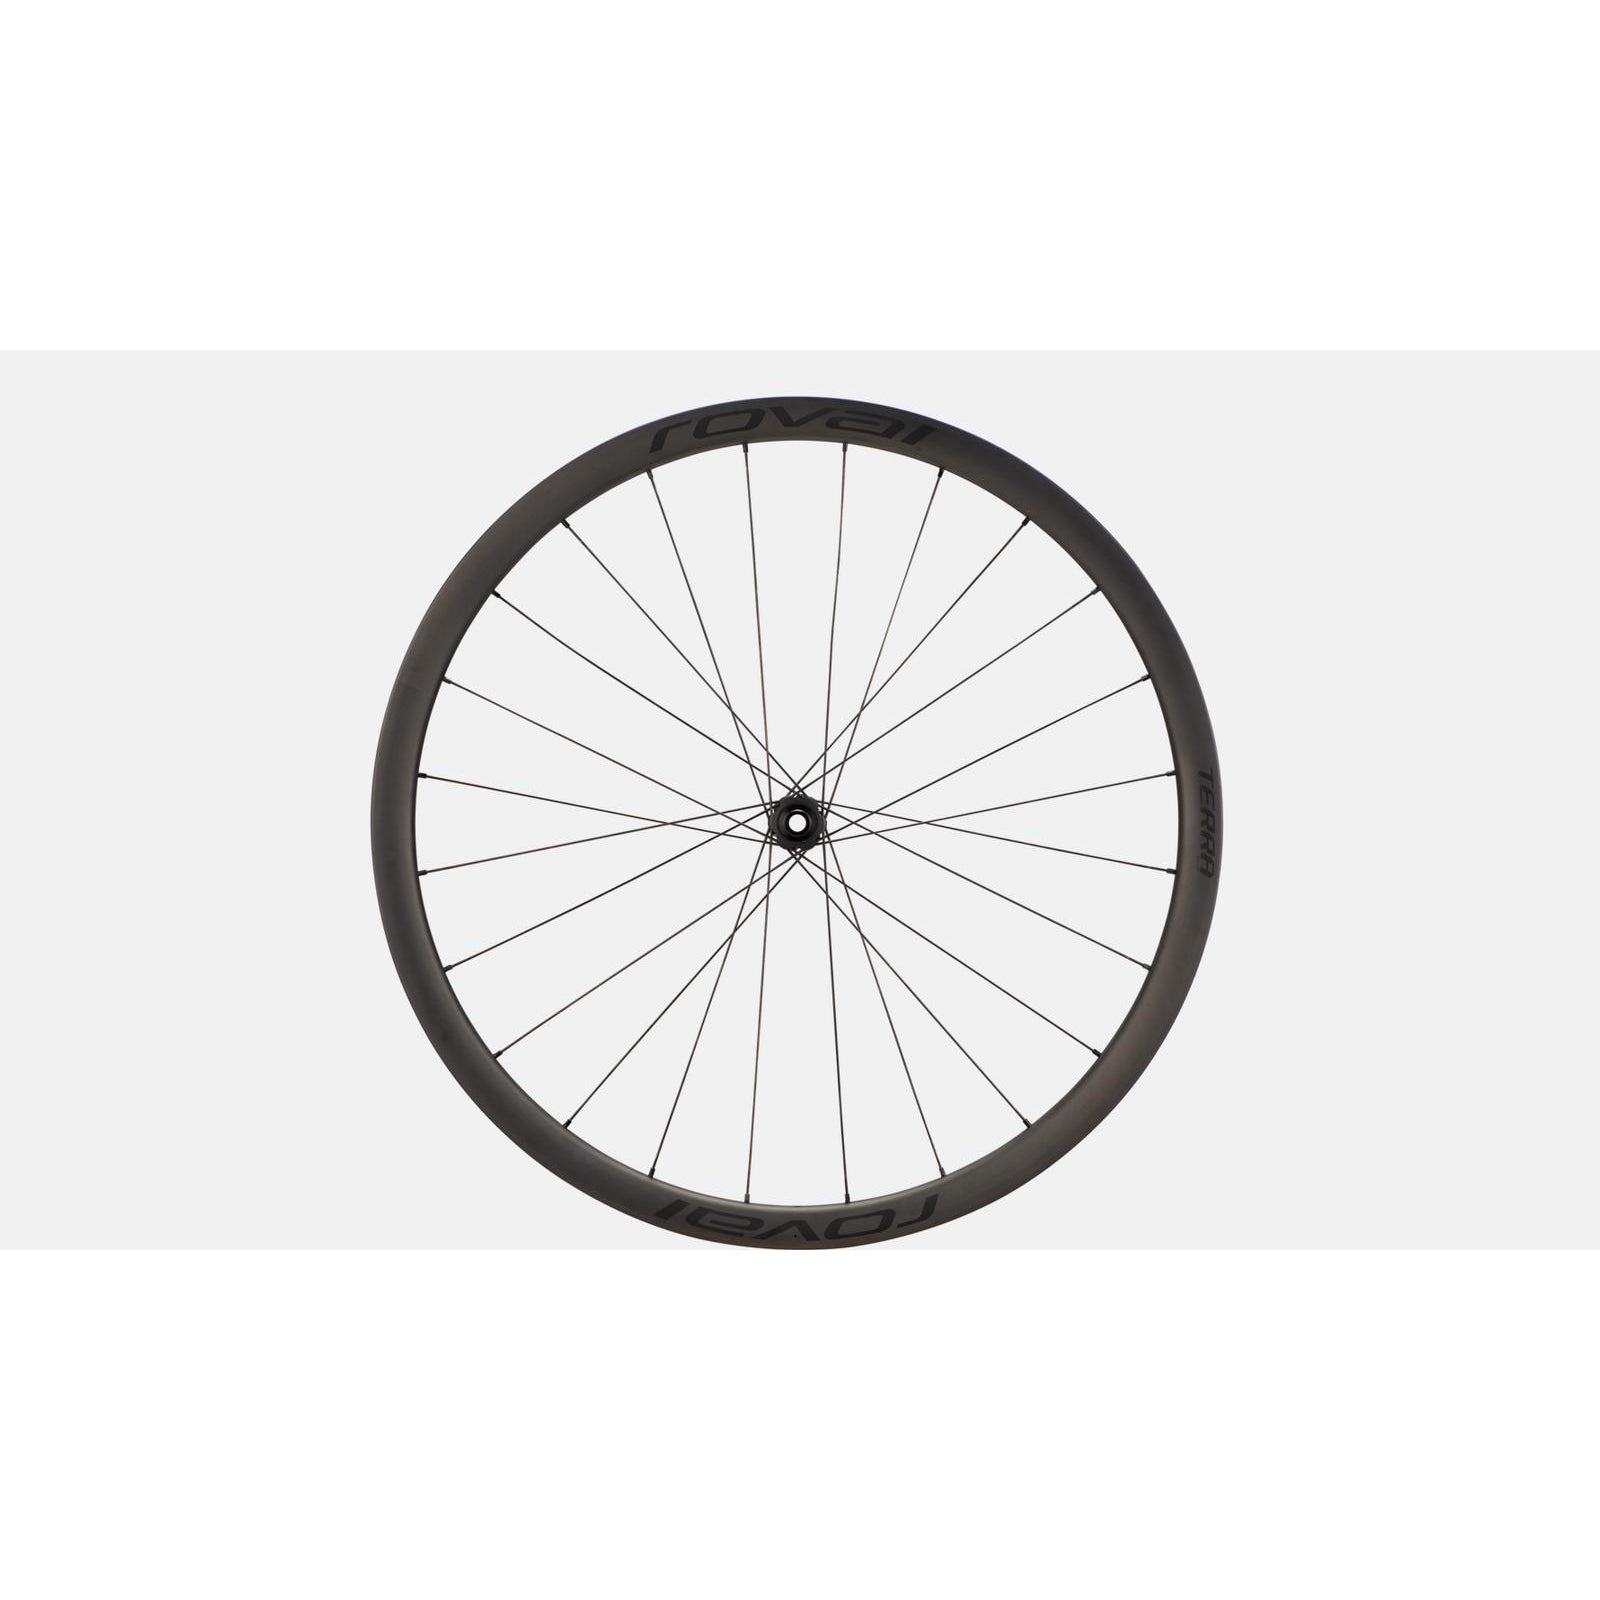 Specialized Roval Terra CL Wheelset - Bicycle Rims - Bicycle Warehouse